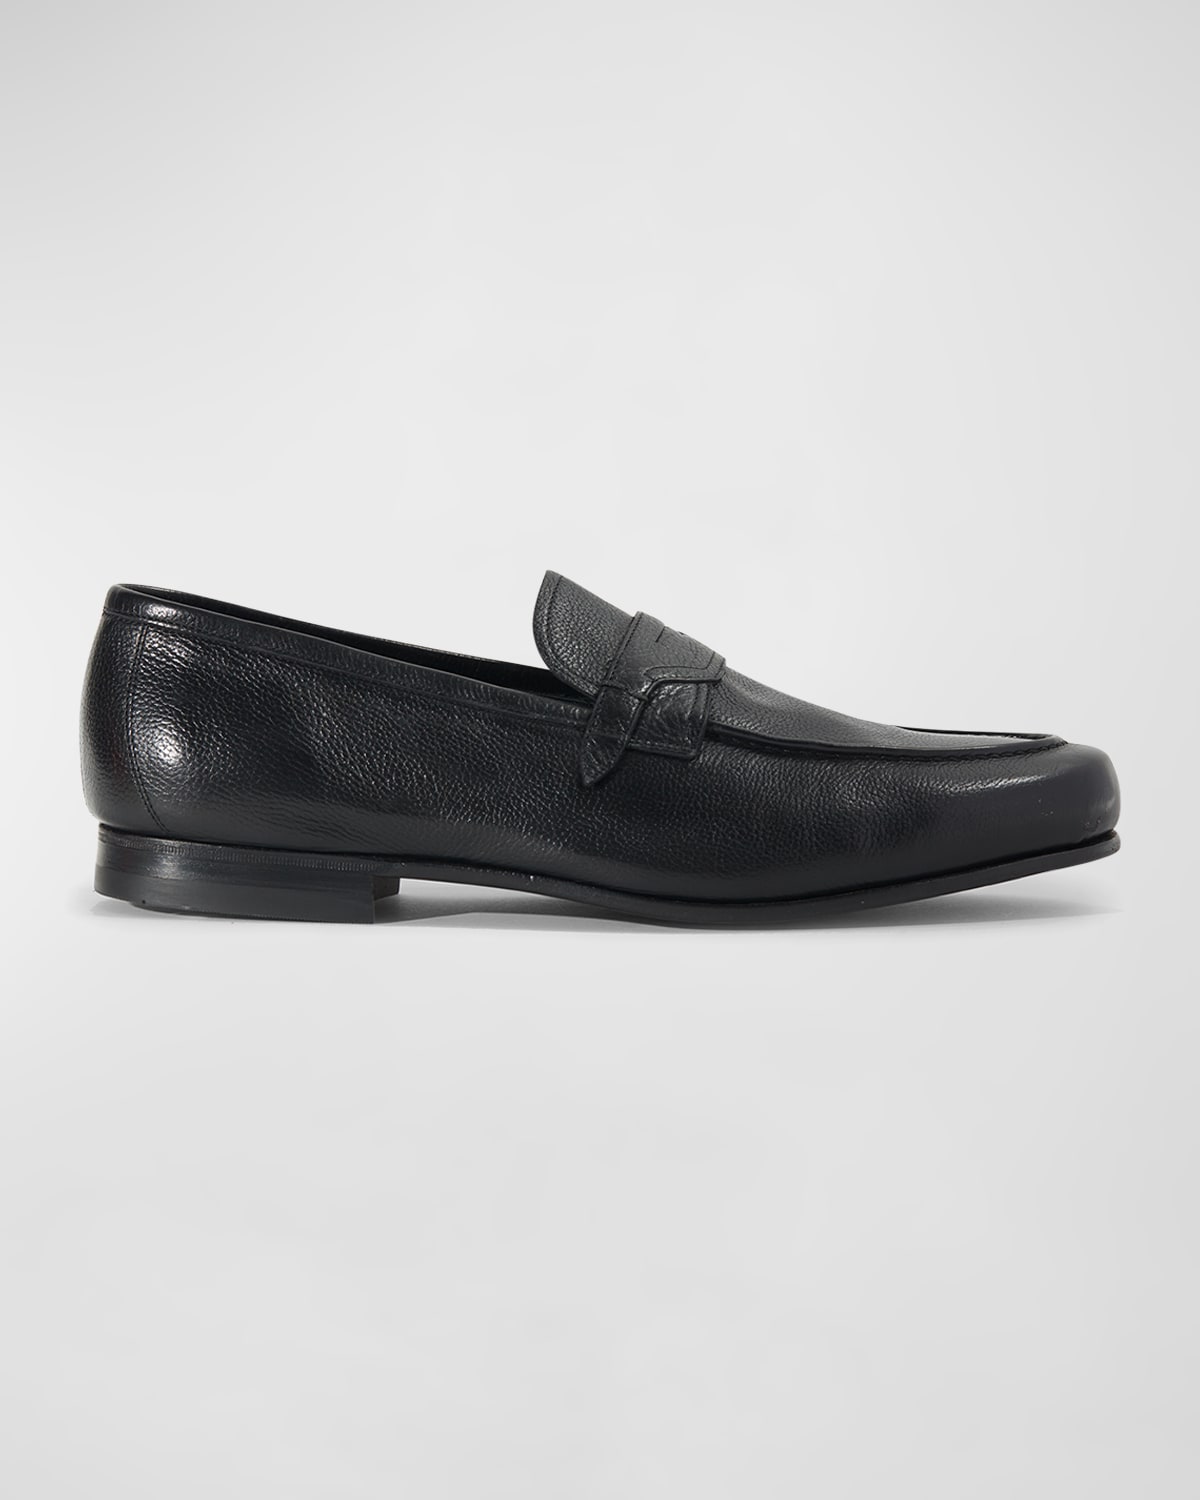 Men's Soft Leather Penny Loafers